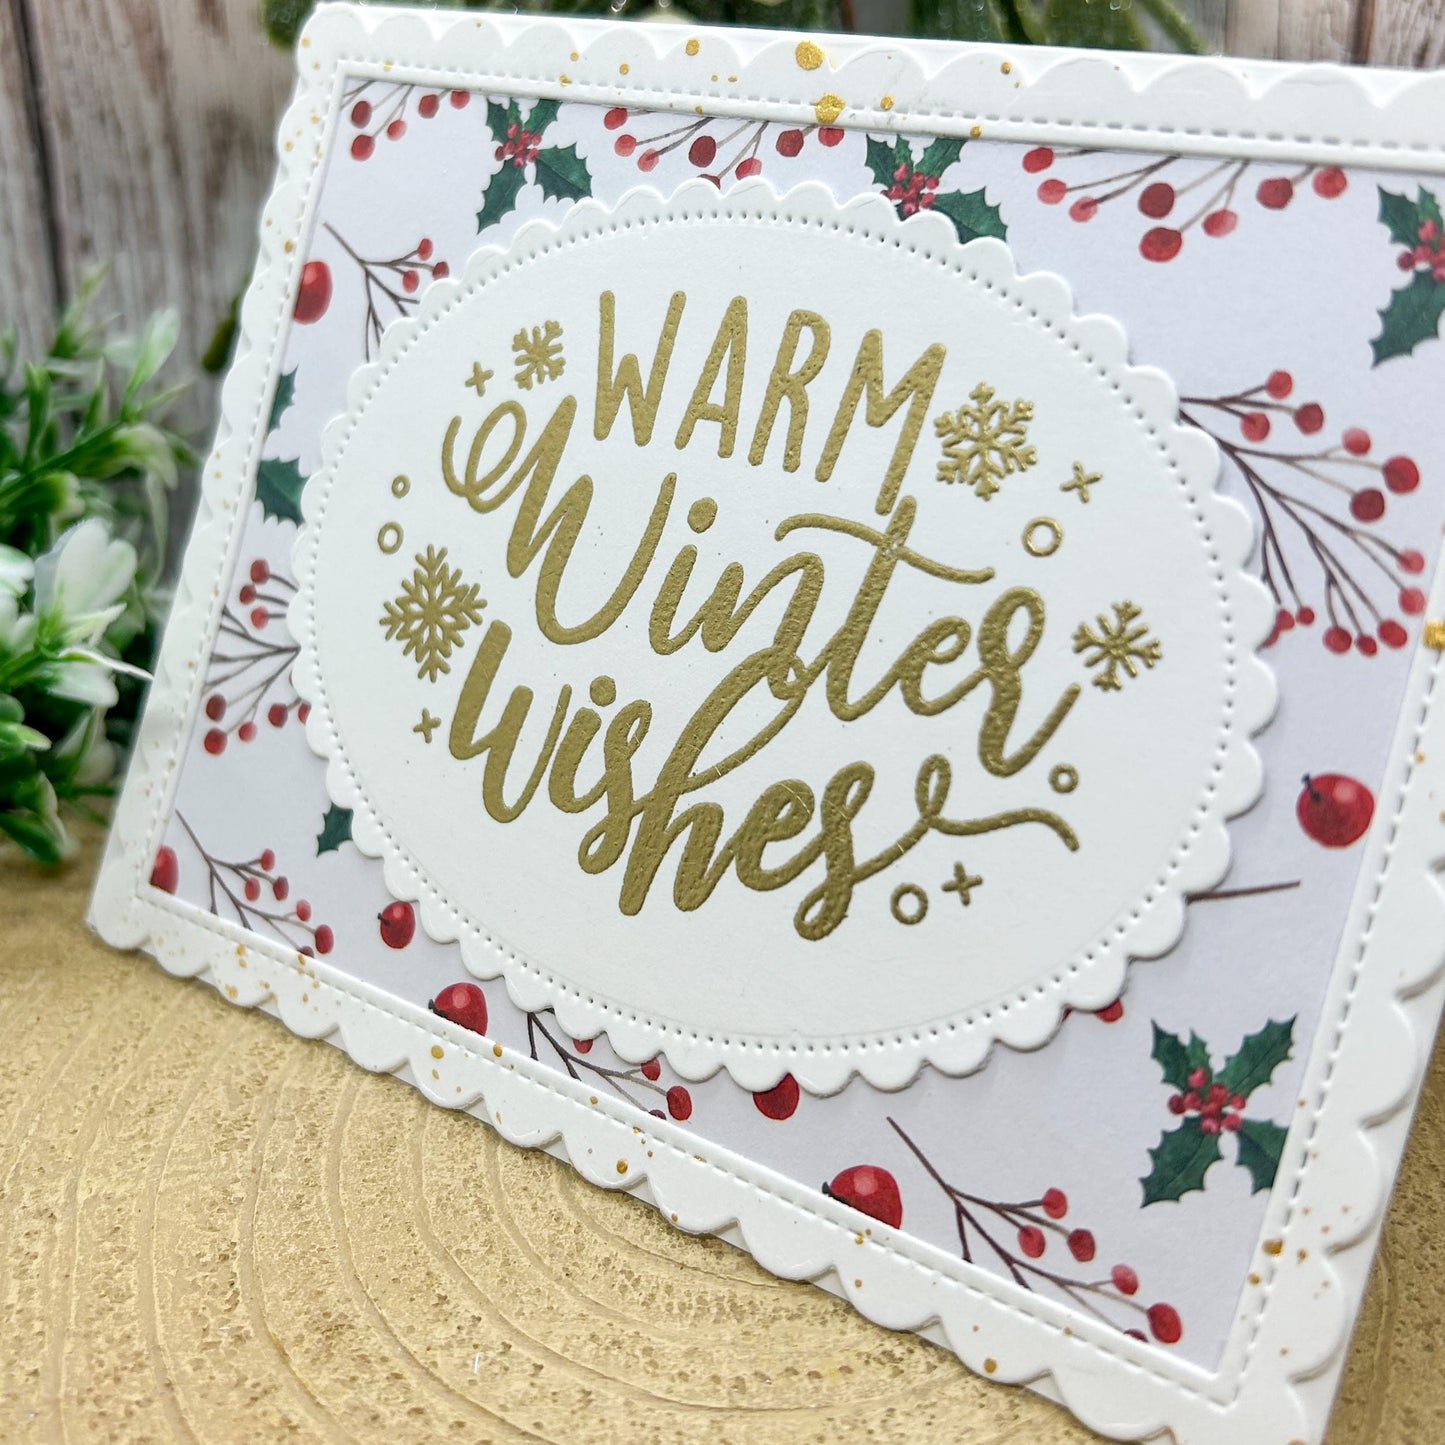 Holly & Berries Warm Winter Wishes Handmade Christmas Card-2